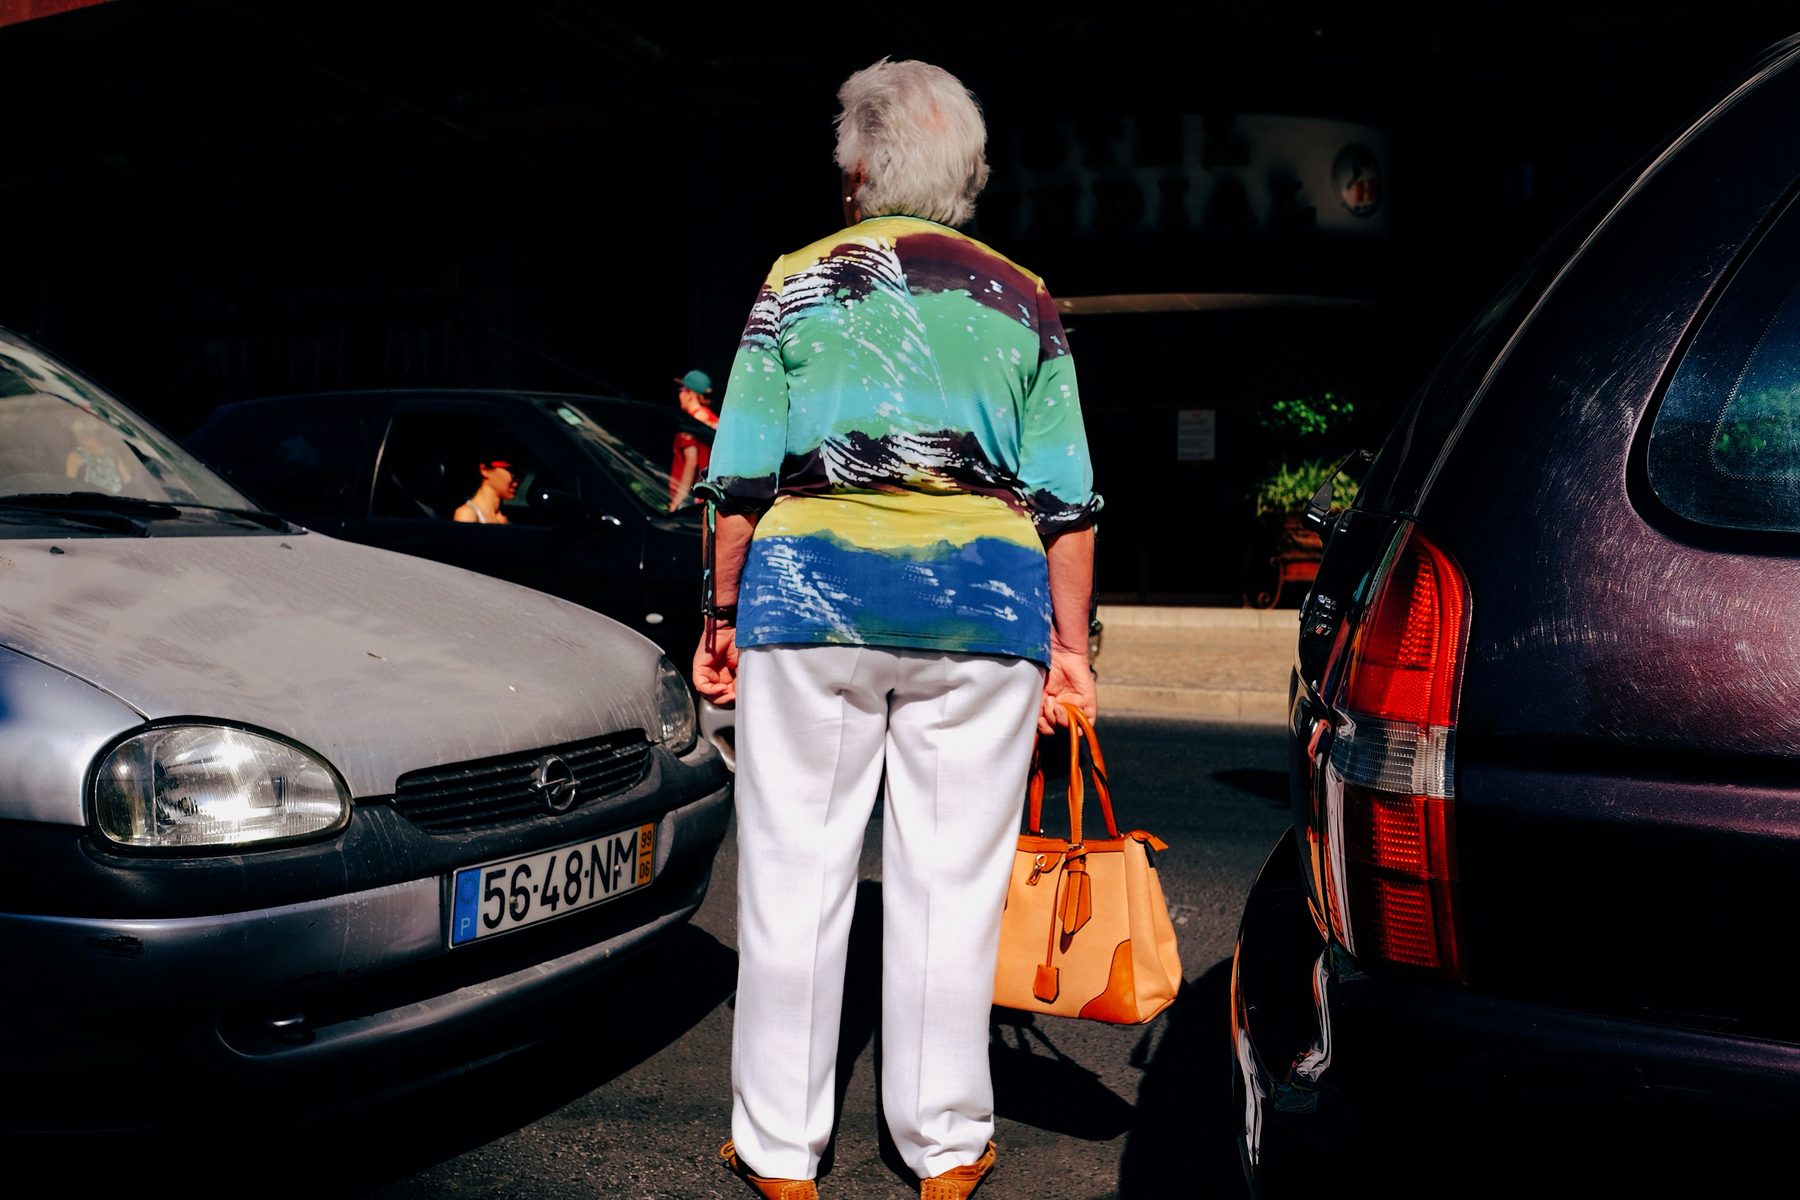 a woman with a very colourful shirt crosses the street.